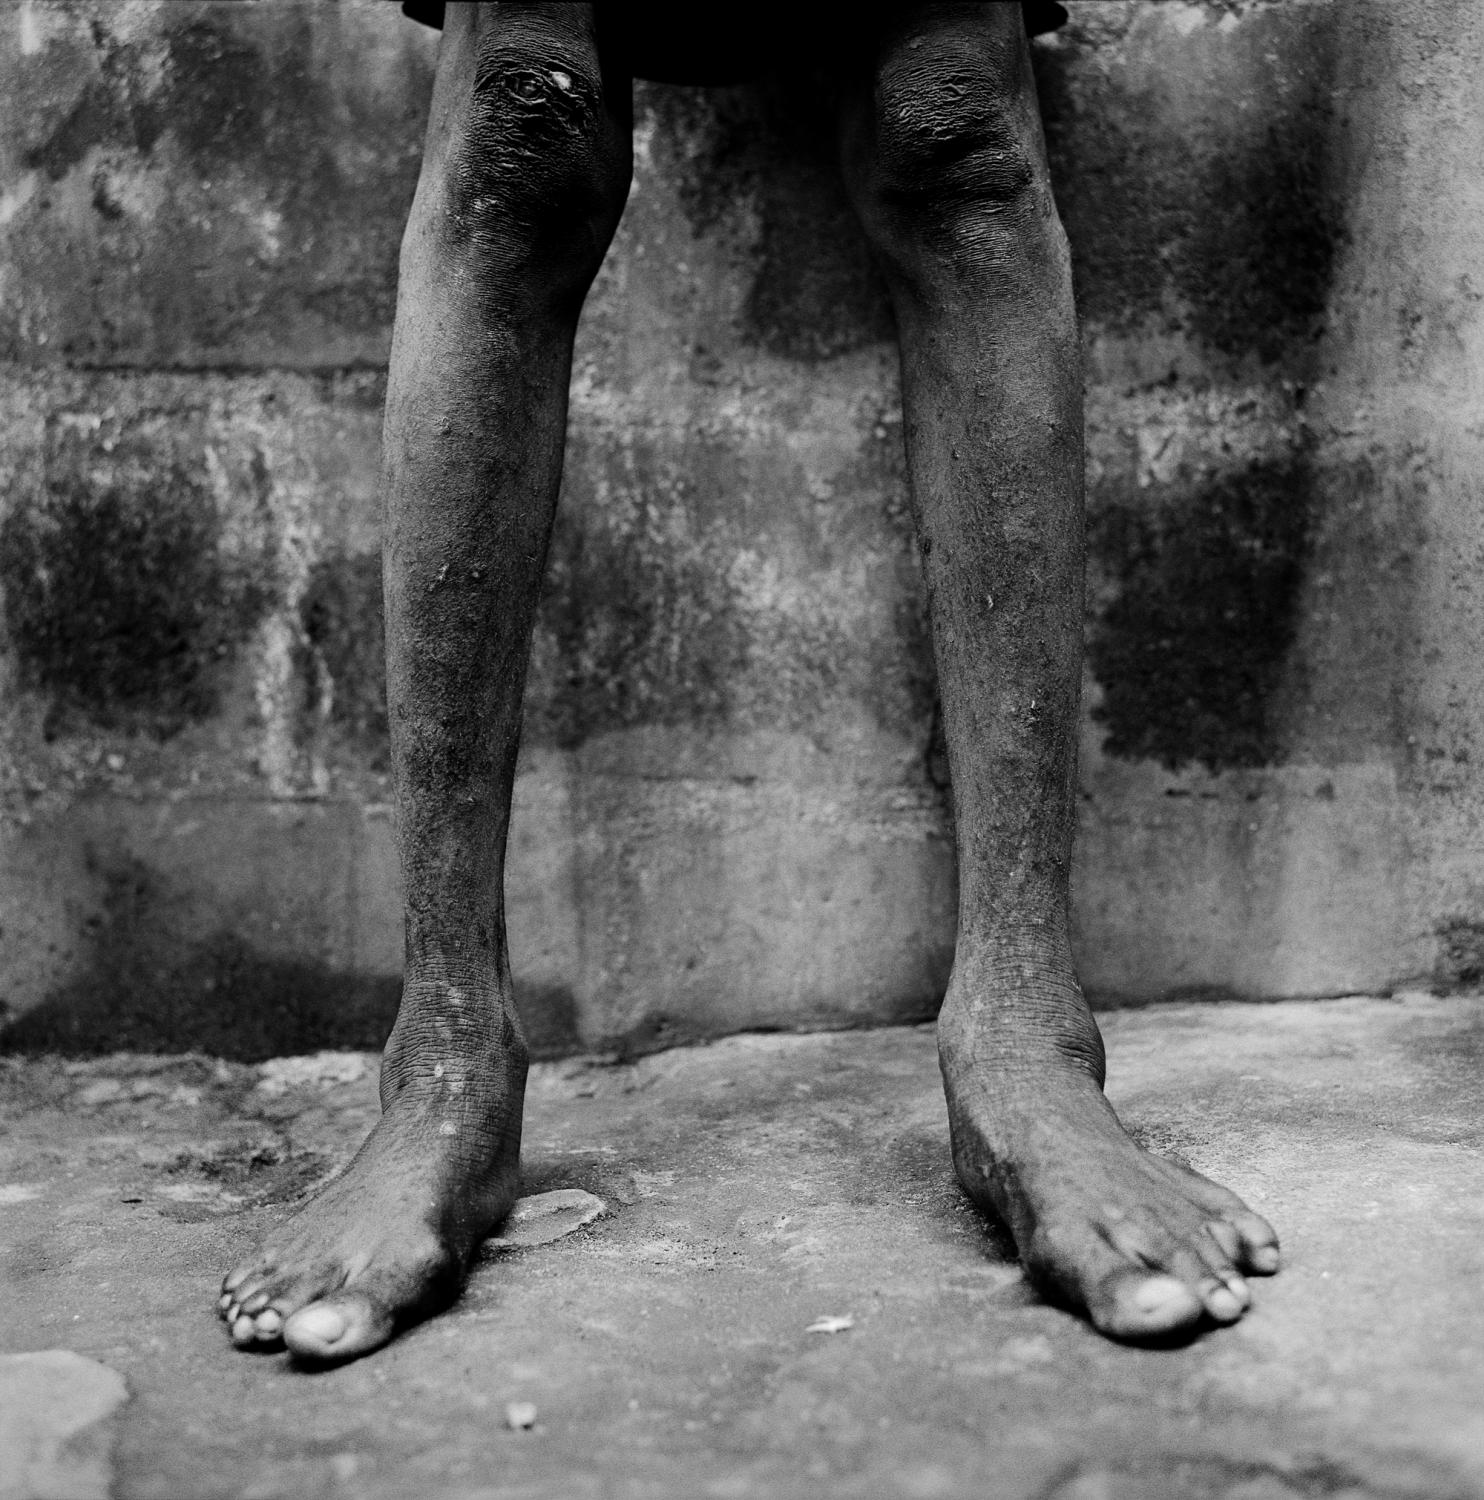 City of rest - SIERRA LEONE Freetown
The legs of a patient at the City...